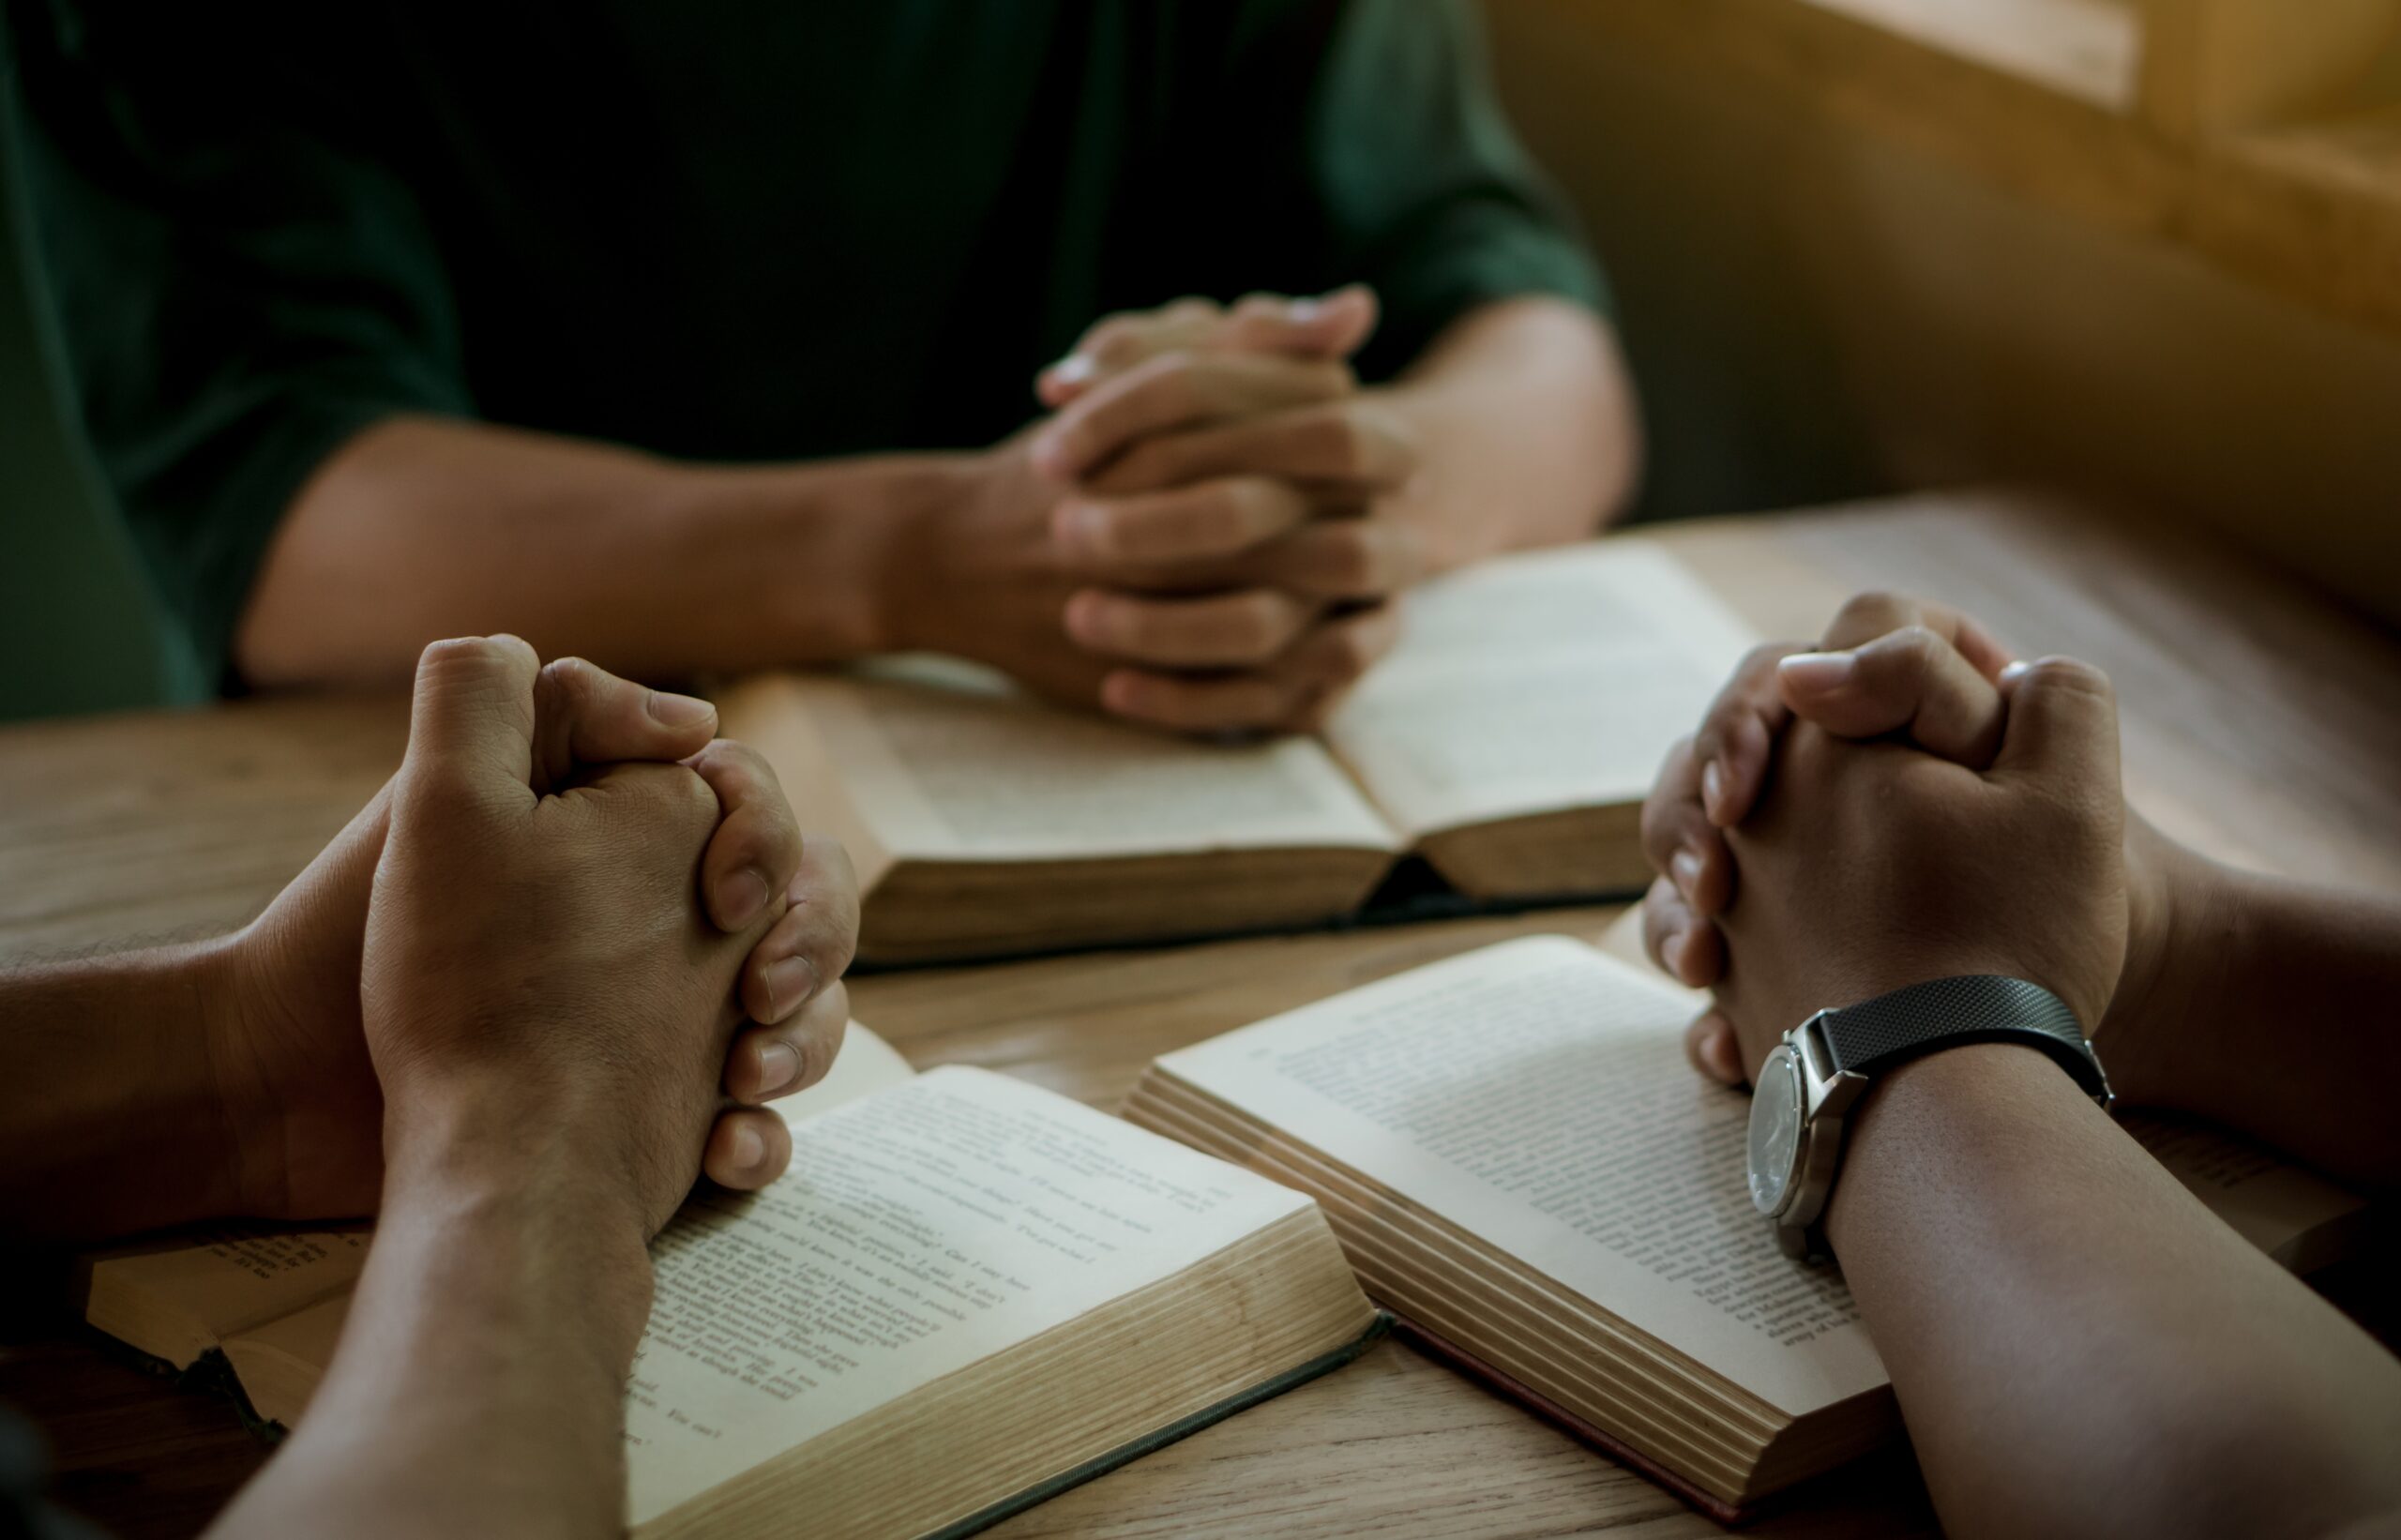 Group of christian people reading and study bible in home and pray together.Group of people holding hands praying worship god.Diverse religious shoot.